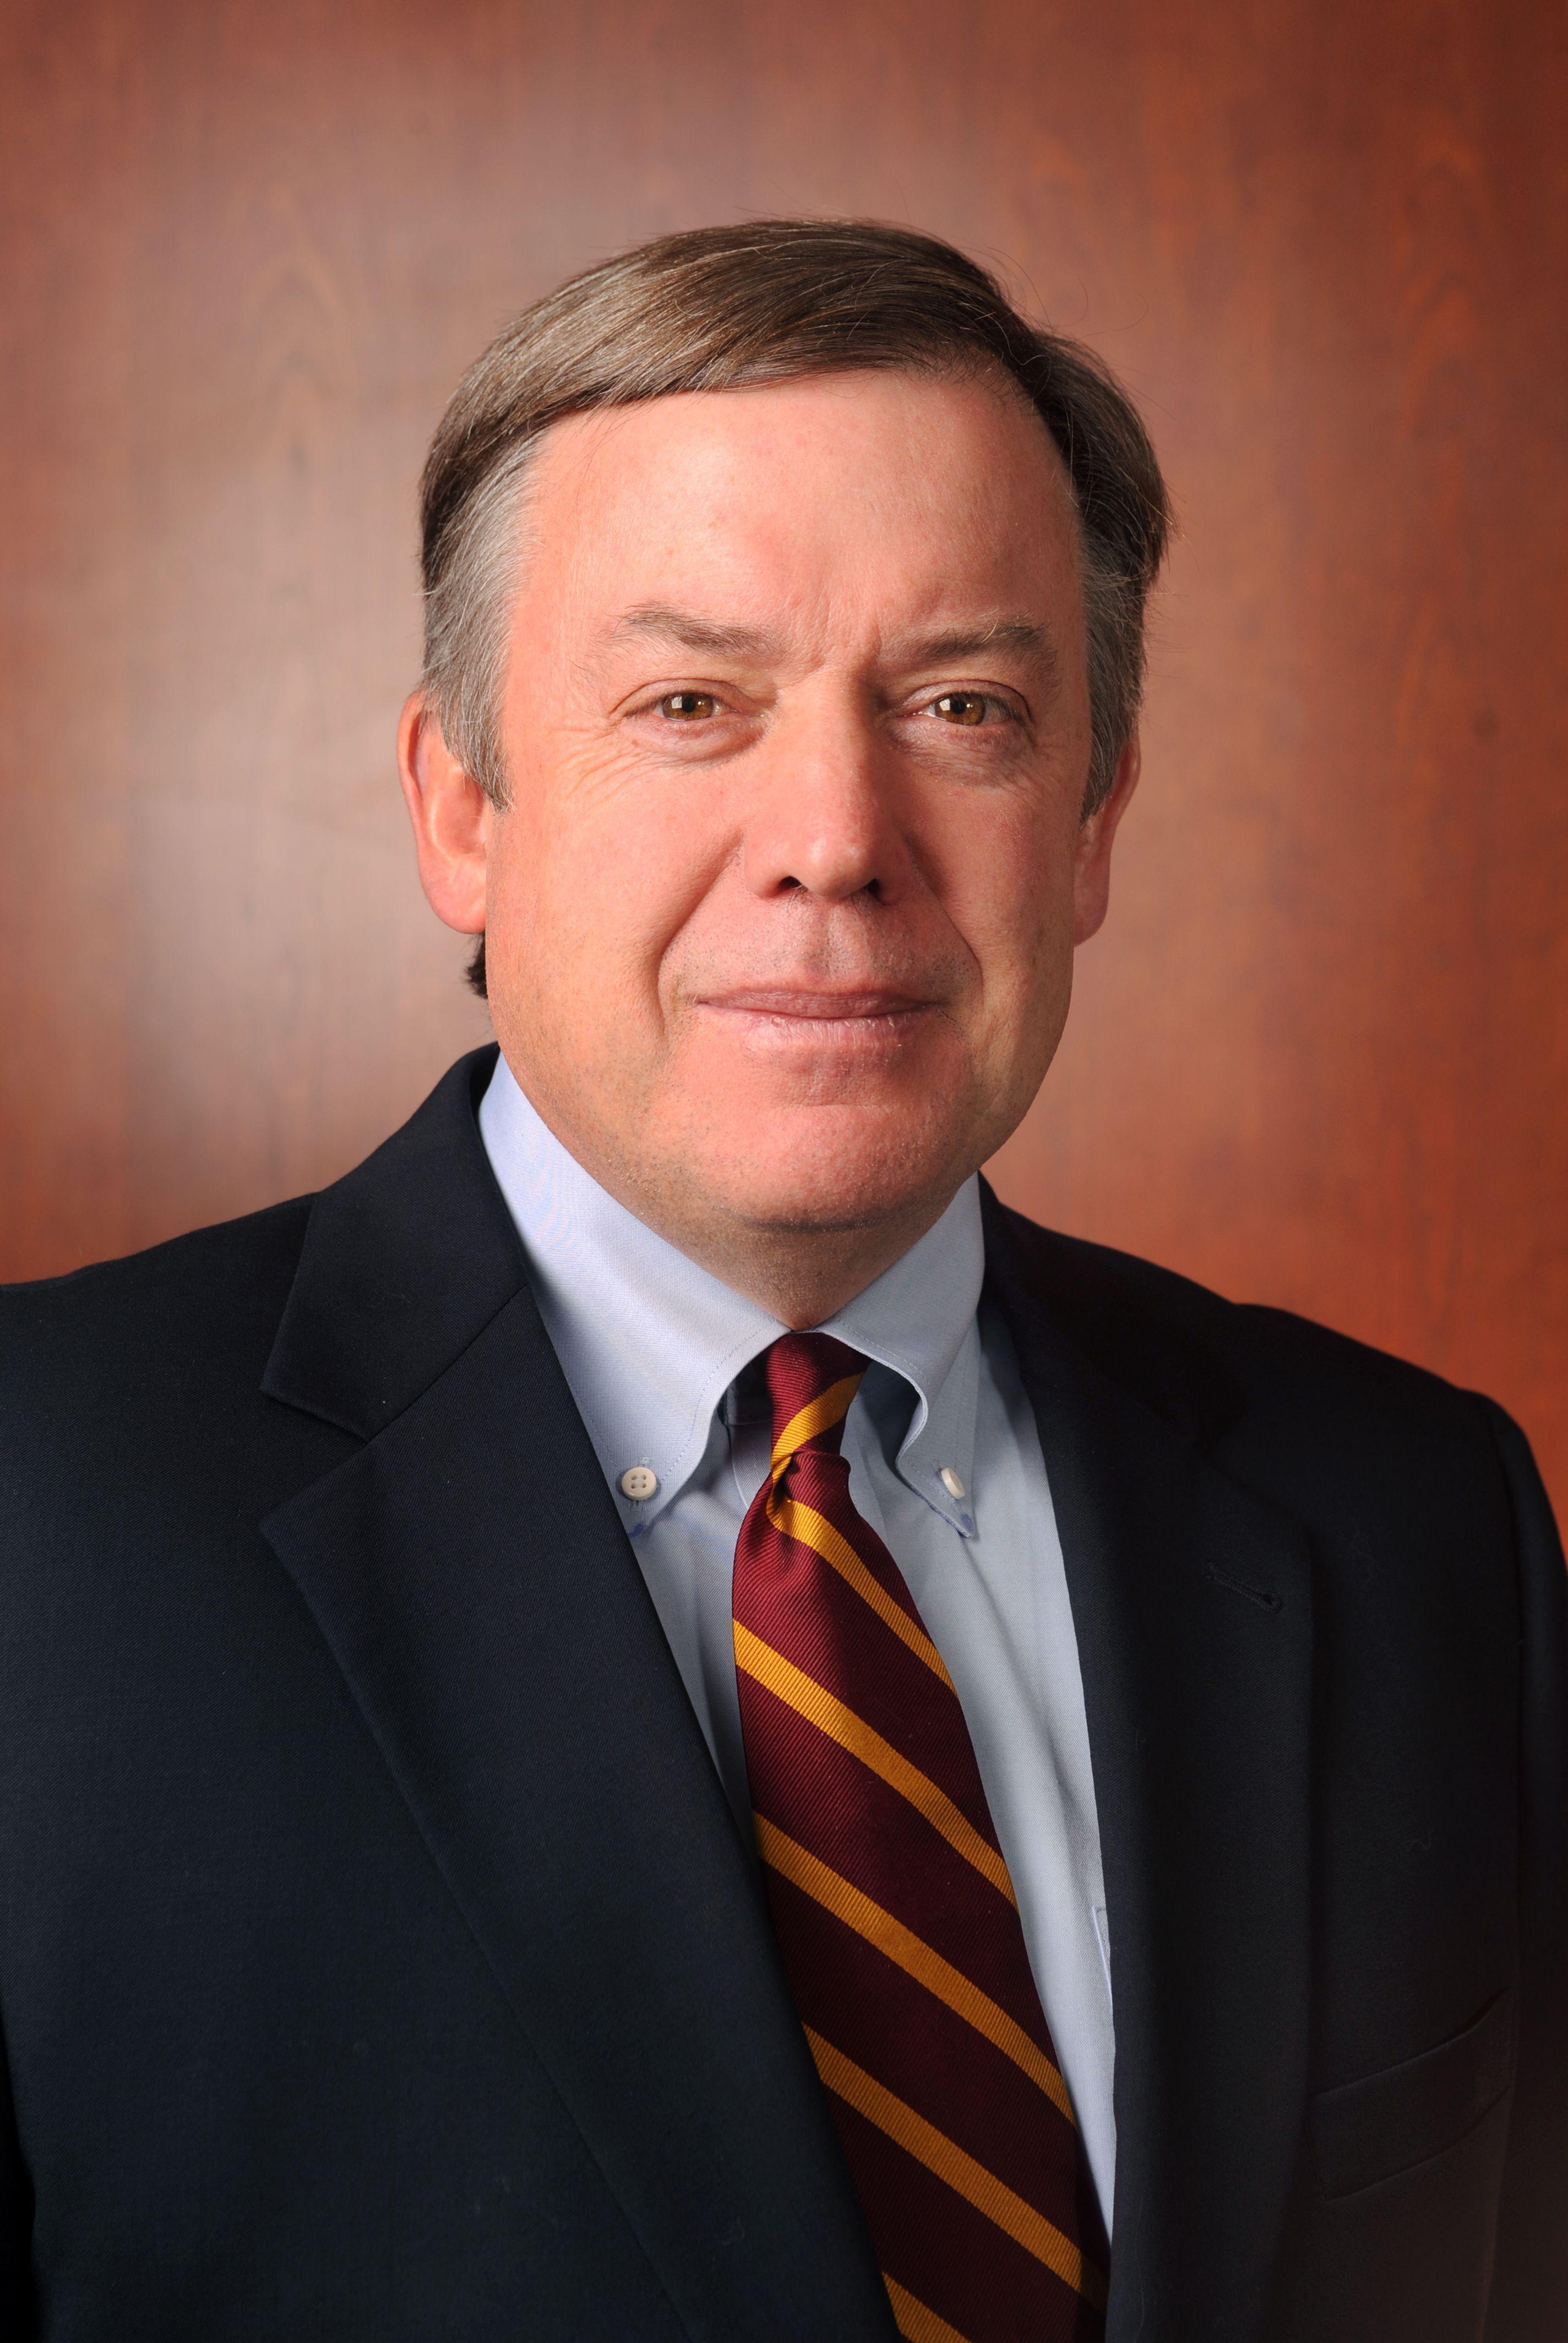 ASU's Michael Crow was top-paid public-university president in 2016, earning $1.5M